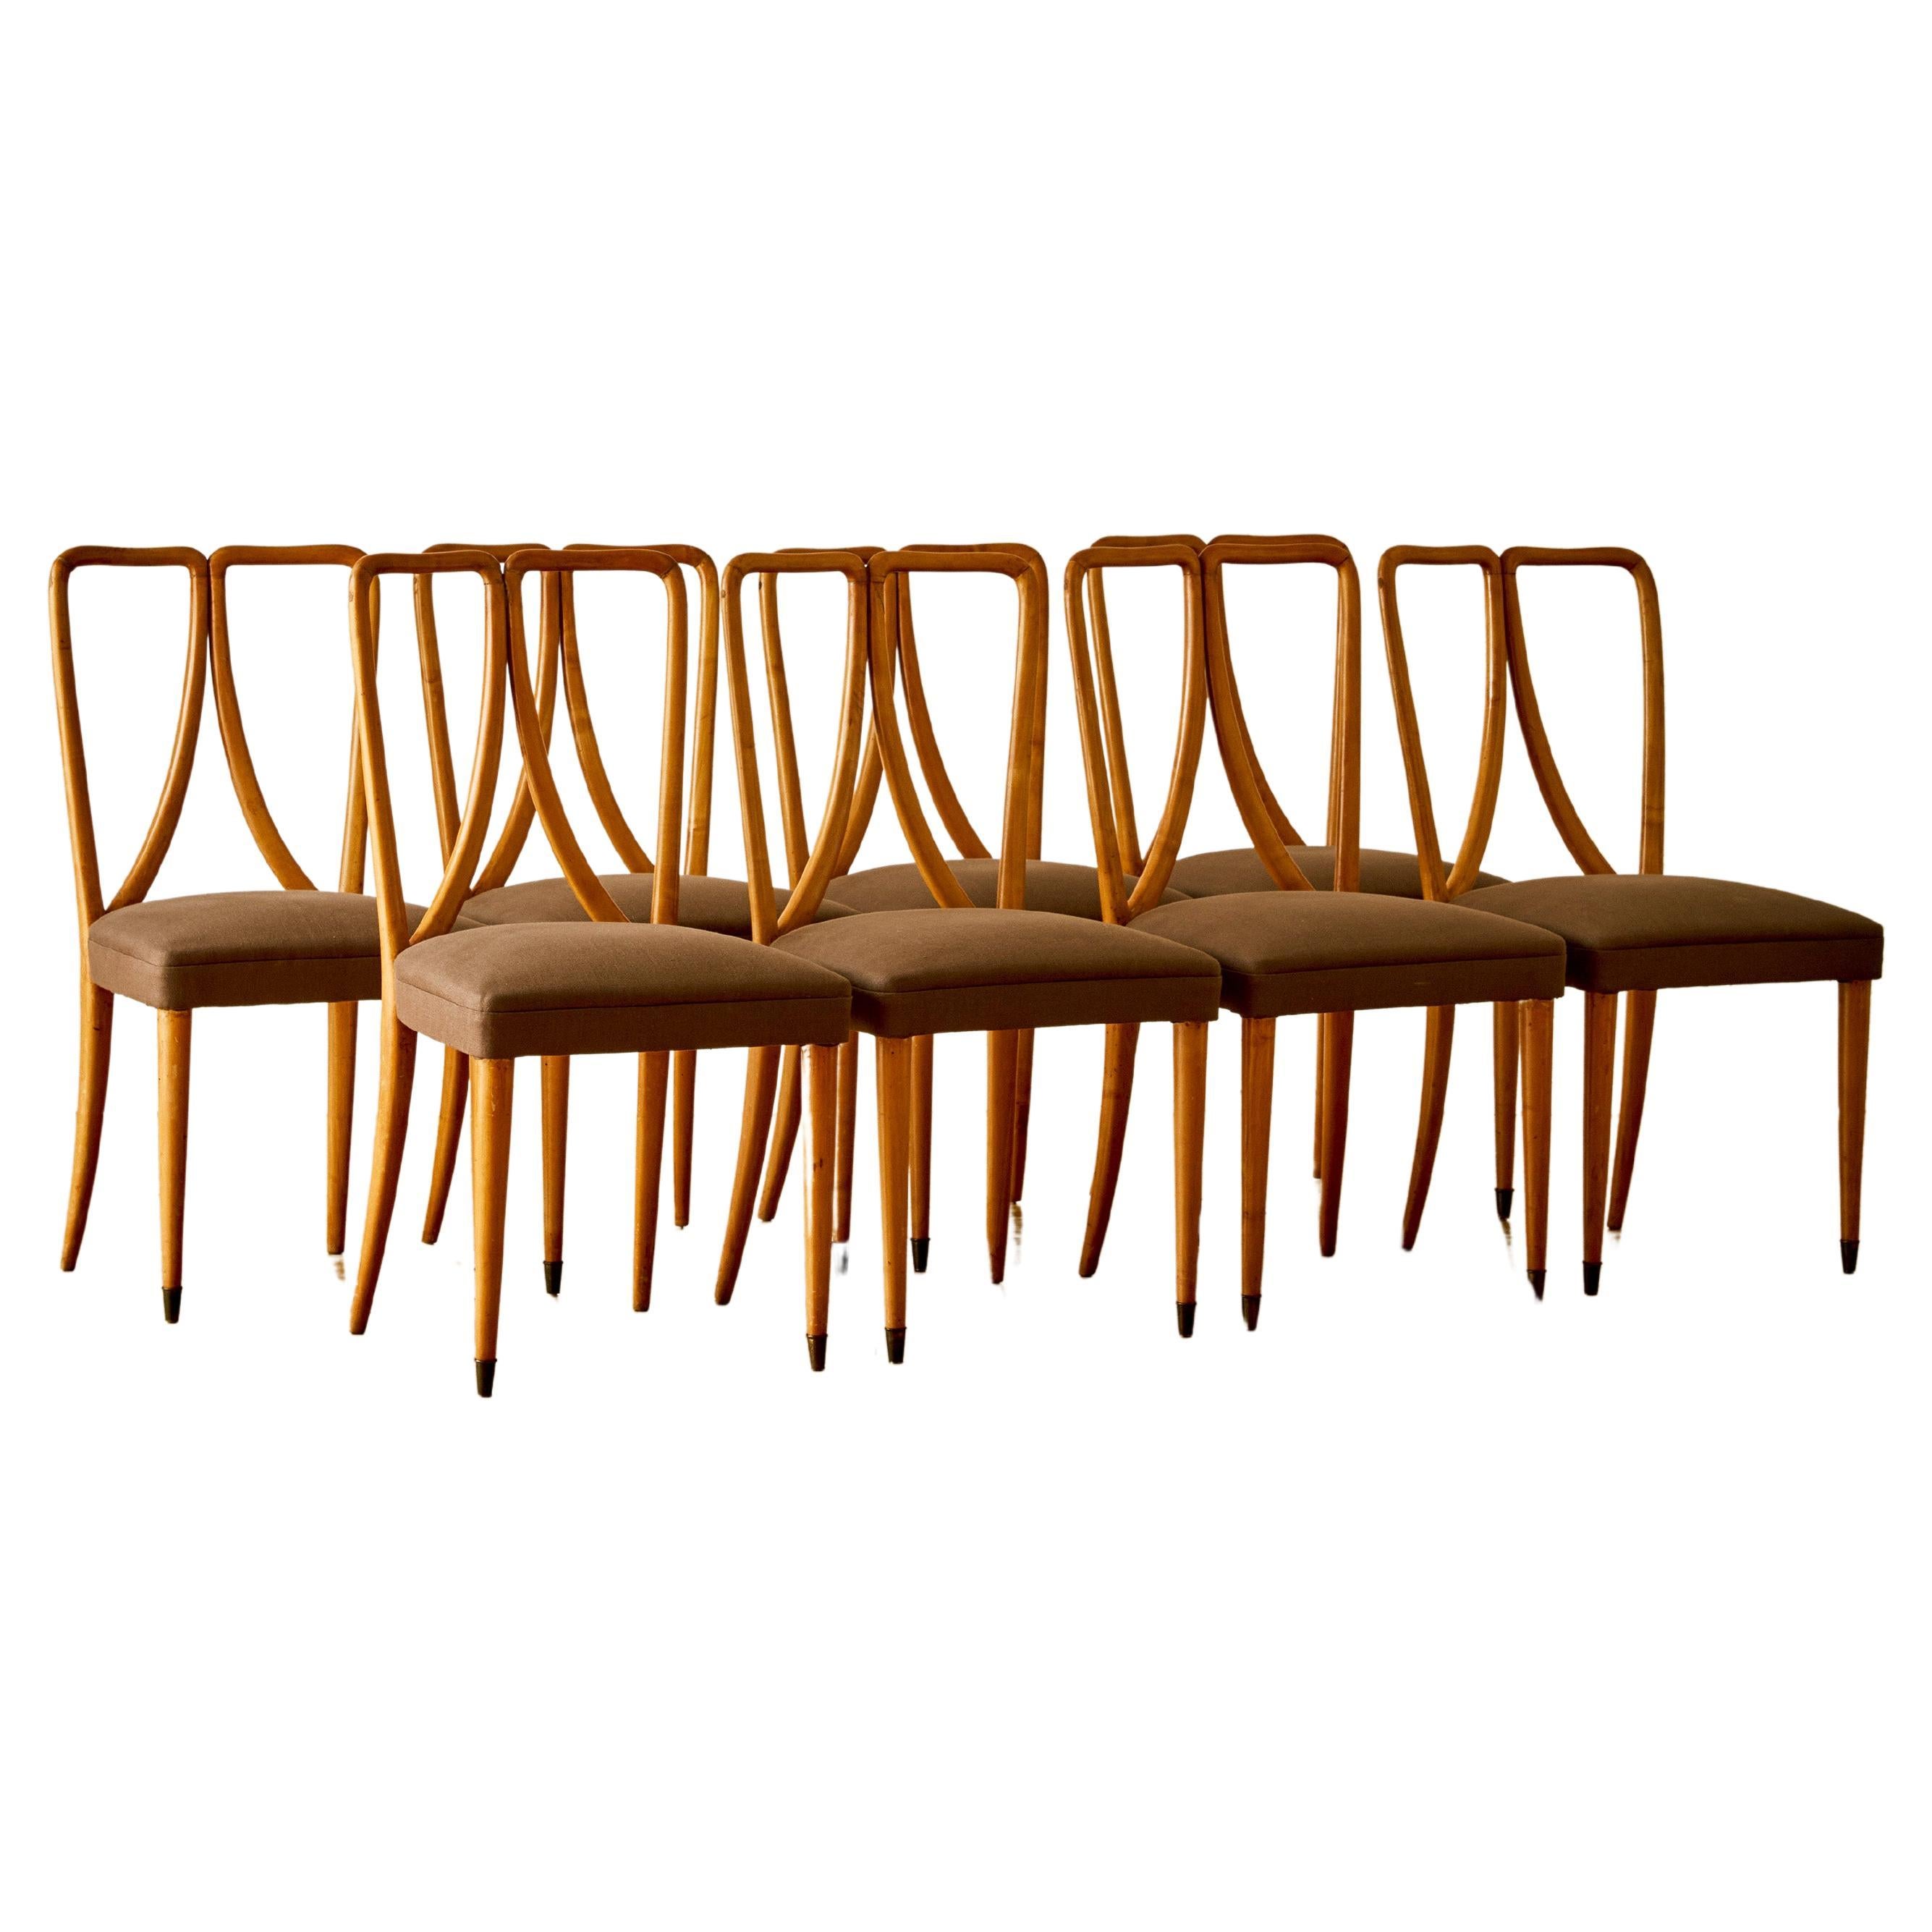  A set of 8 fruitwood dining chairs by Guglielmo Ulrich For Sale